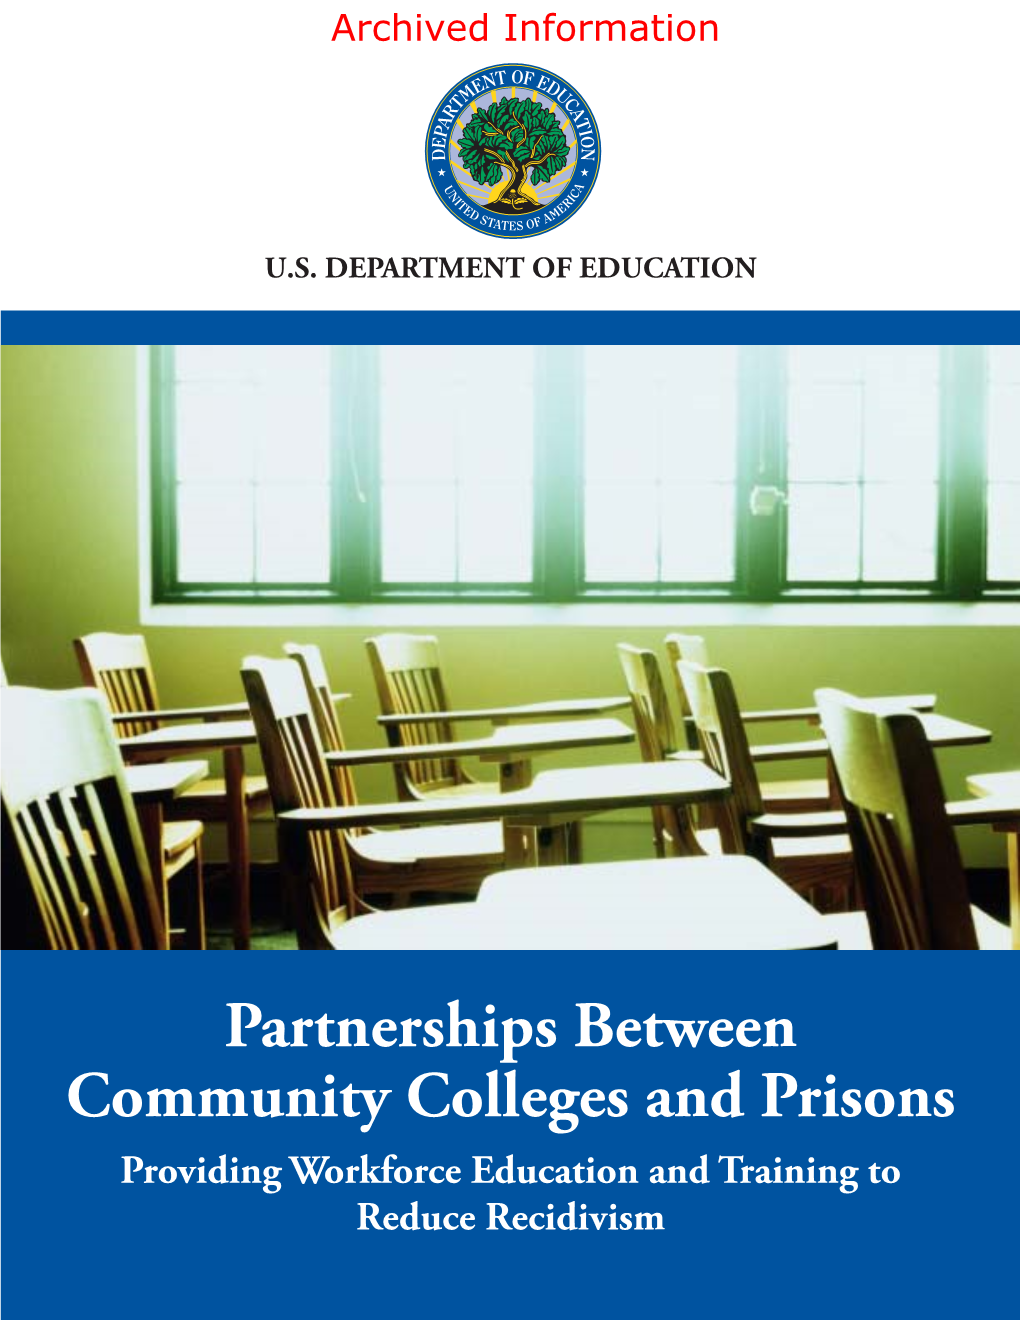 Partnerships Between Community Colleges and Prison -- March, 2009